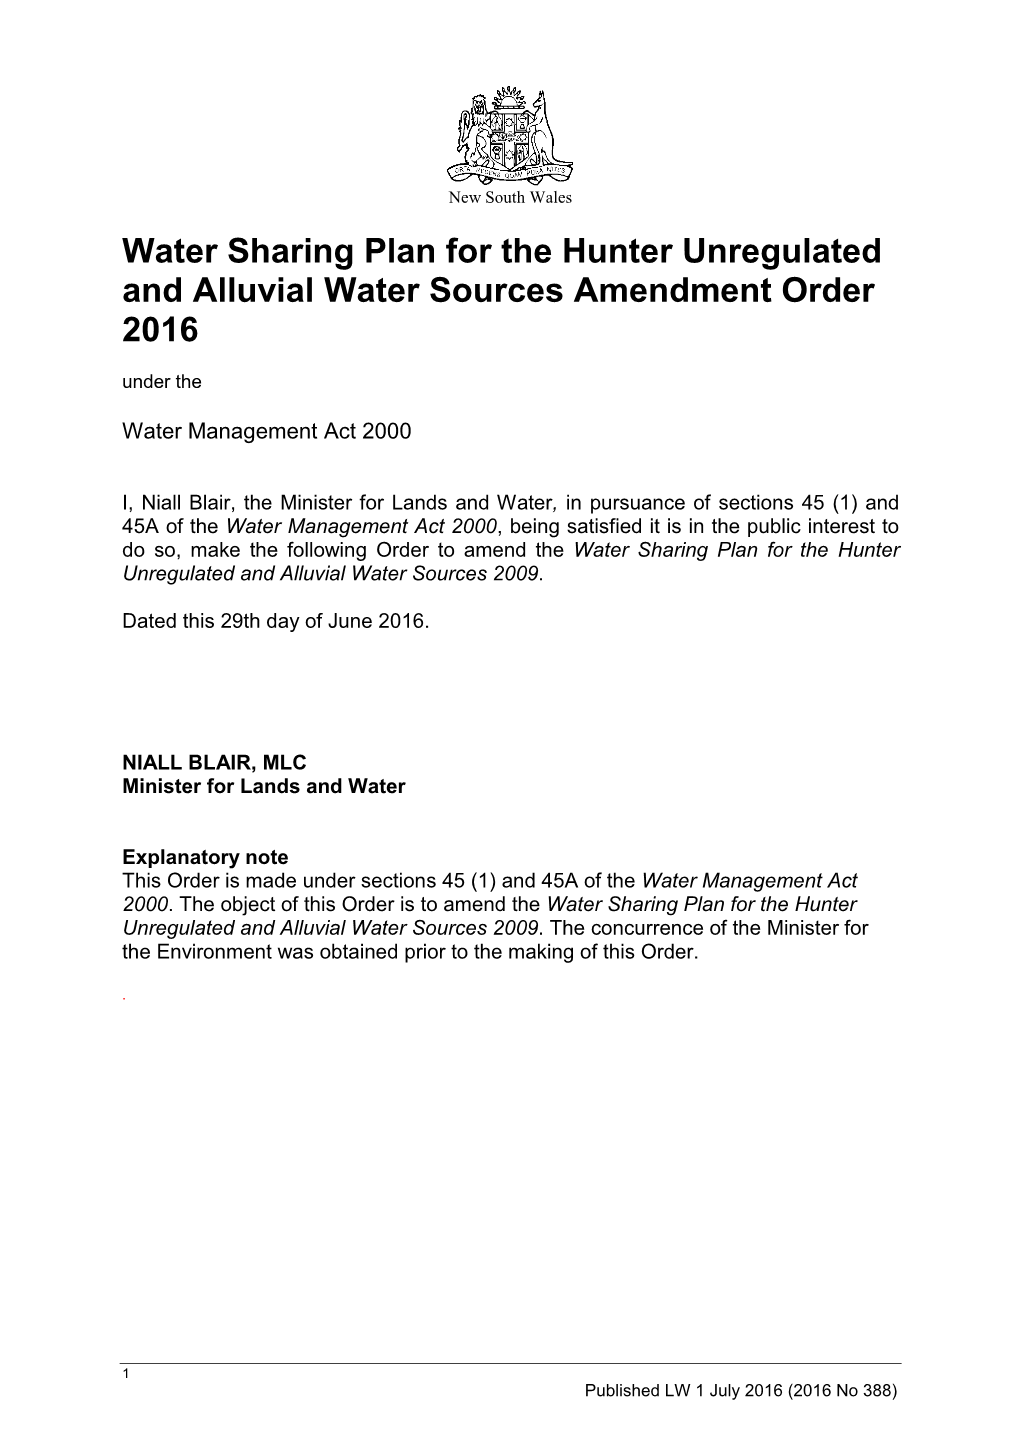 Water Sharing Plan for the Hunter Unregulated and Alluvial Water Sources Amendment Order 2016 Under The